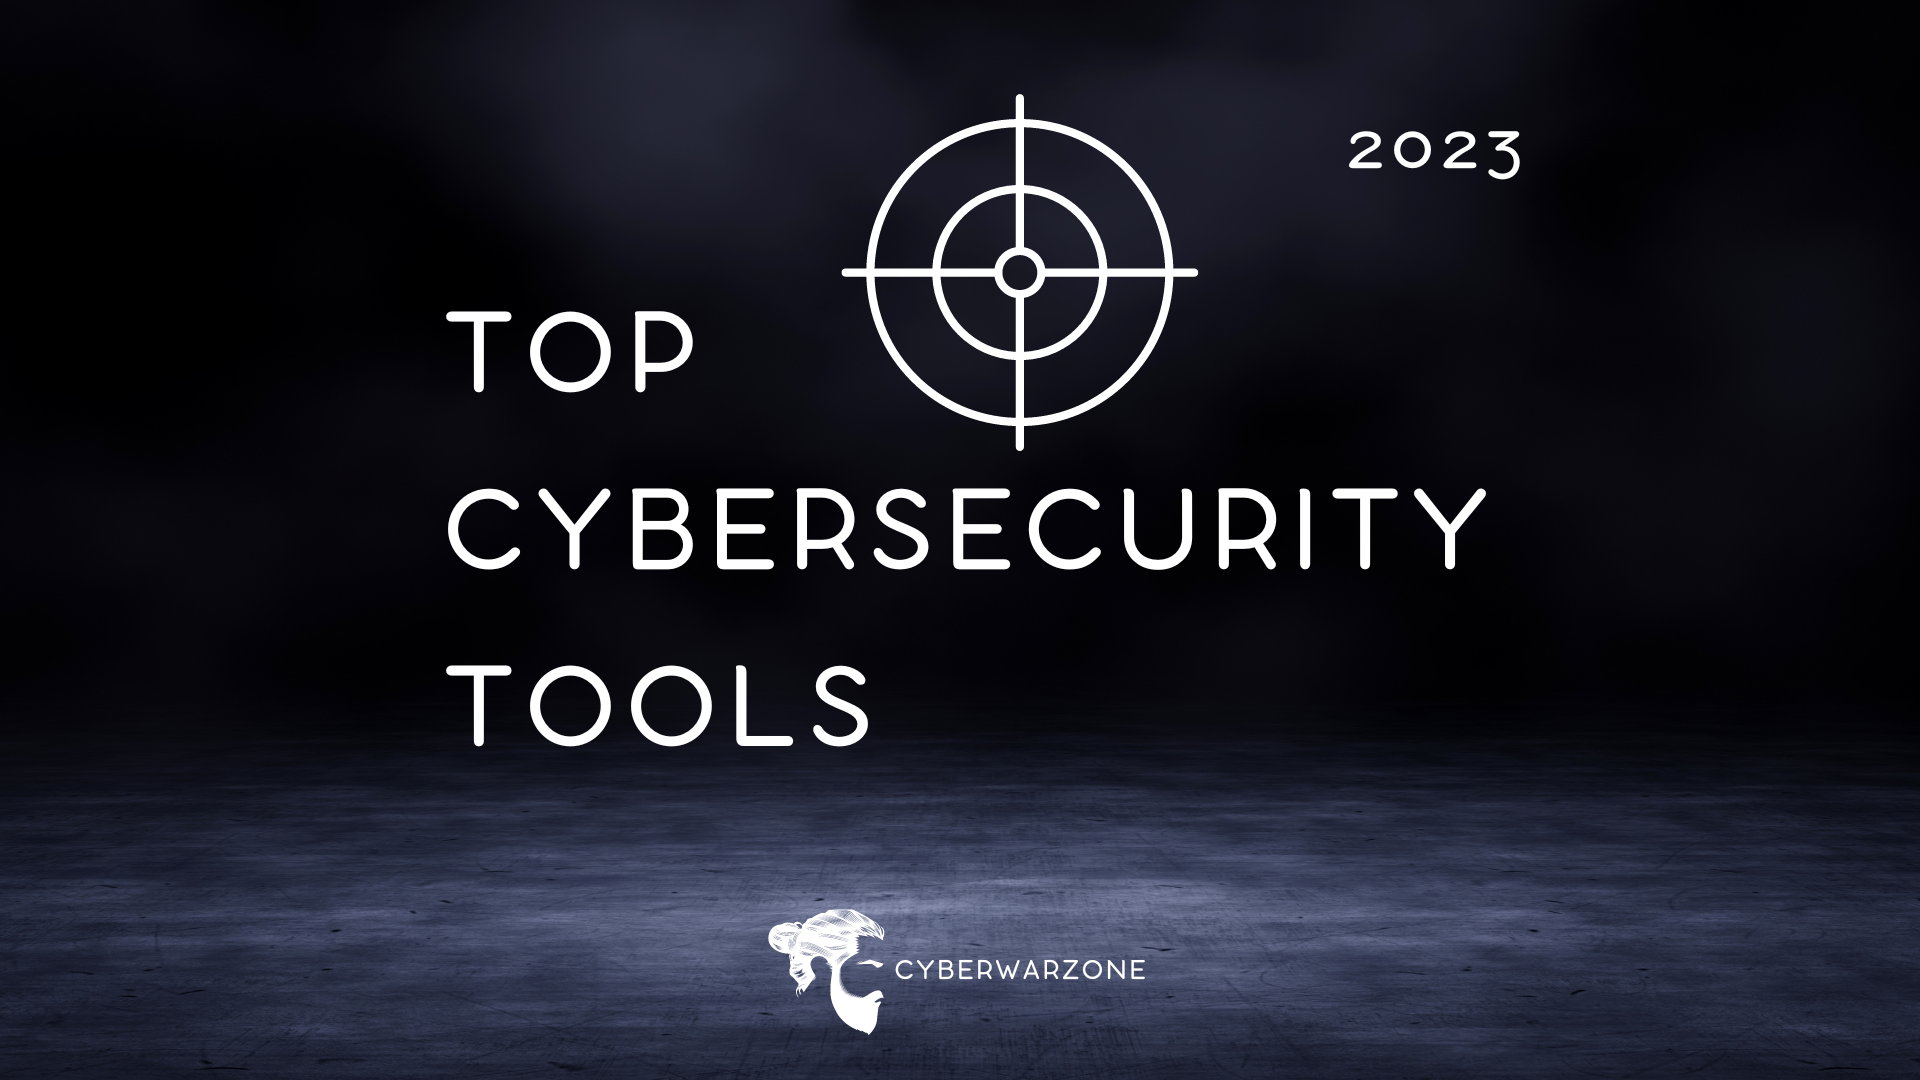 Top Cybersecurity Tools Of 2023